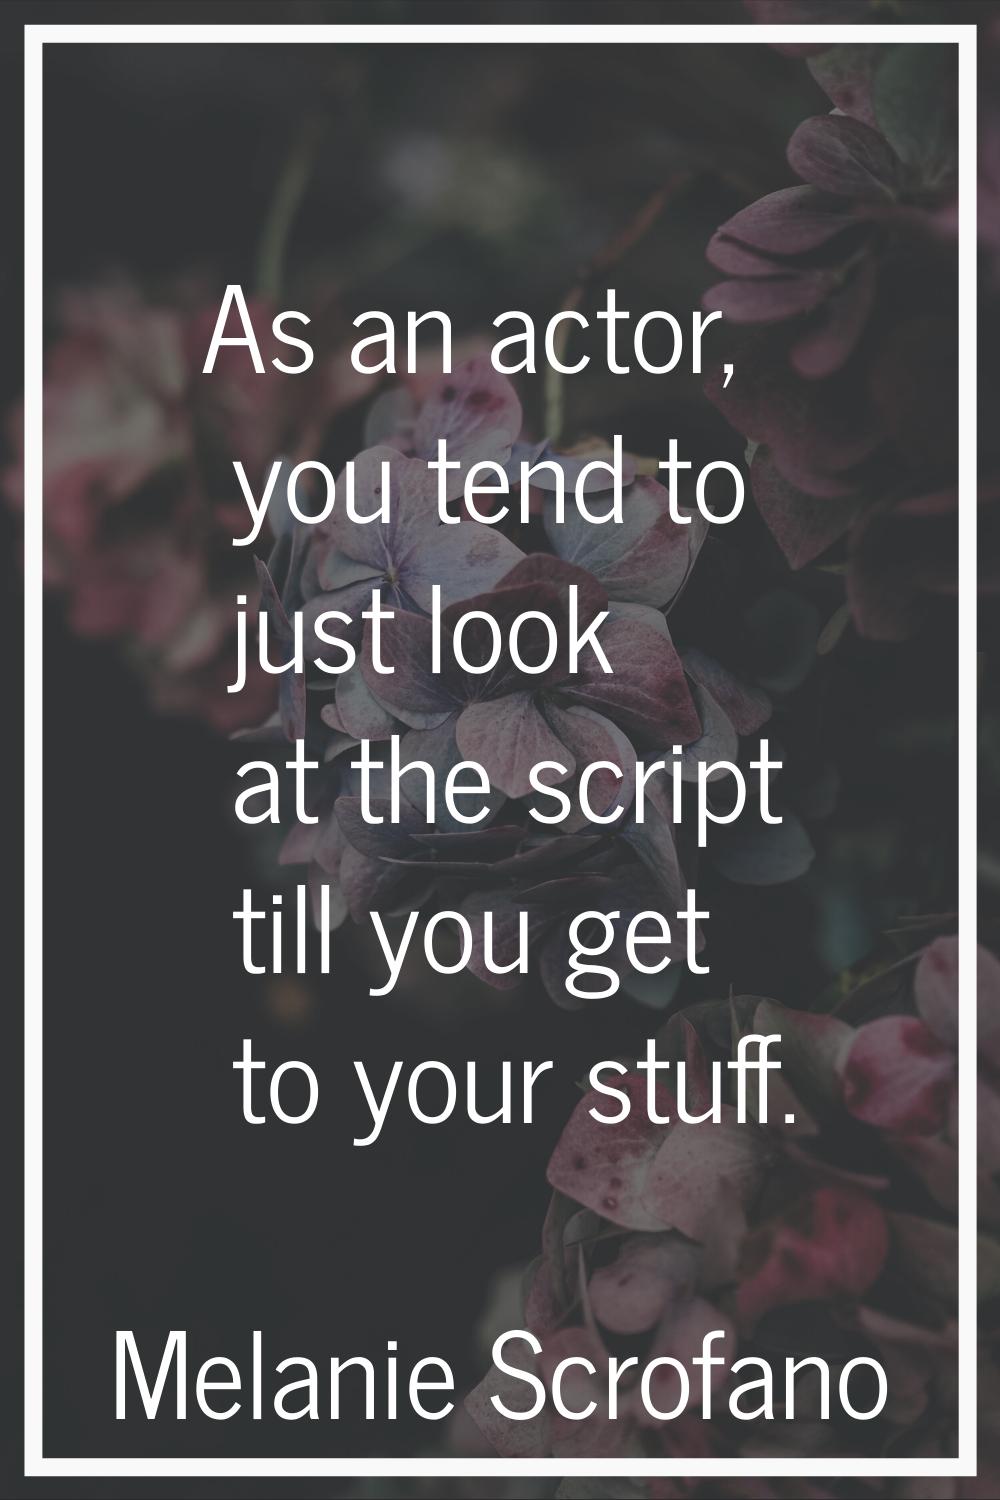 As an actor, you tend to just look at the script till you get to your stuff.